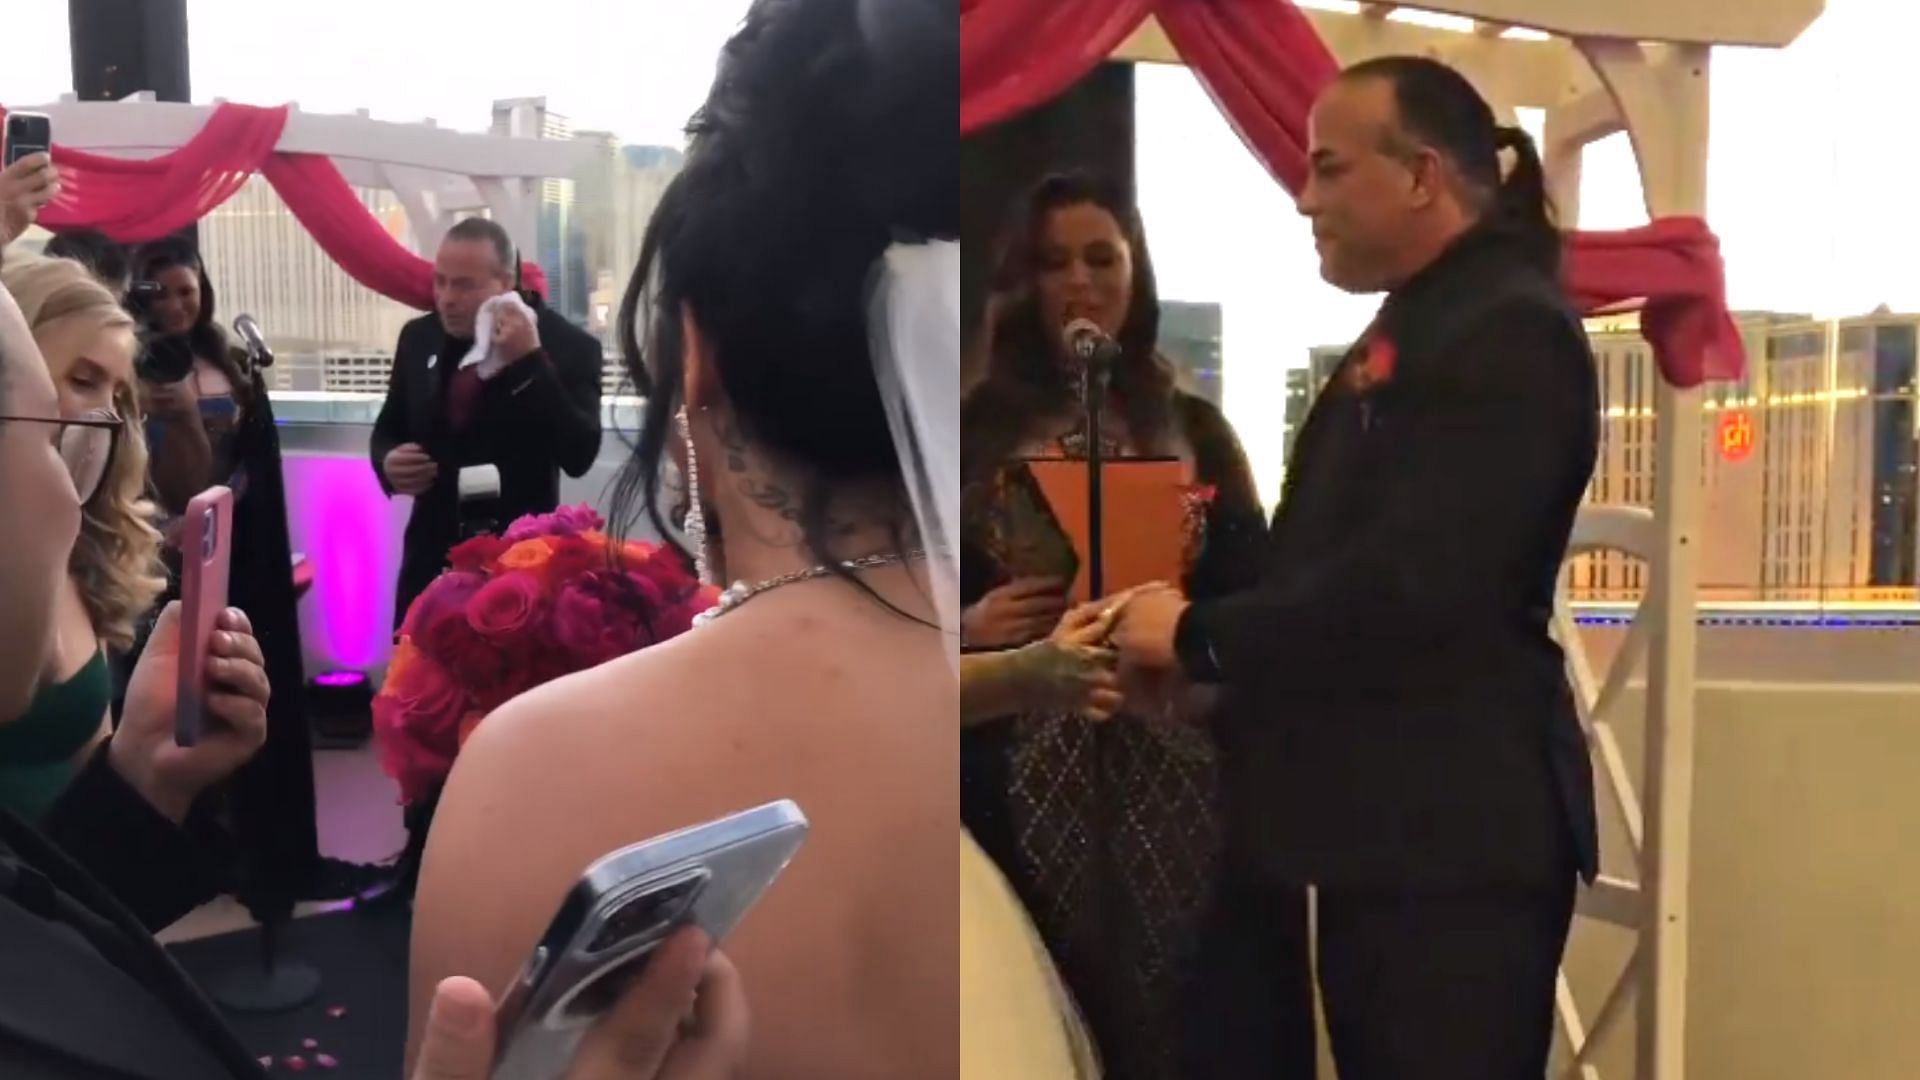 Katie Forbes Xxx Videos - Former WWE star RVD gets married in private Las Vegas ceremony